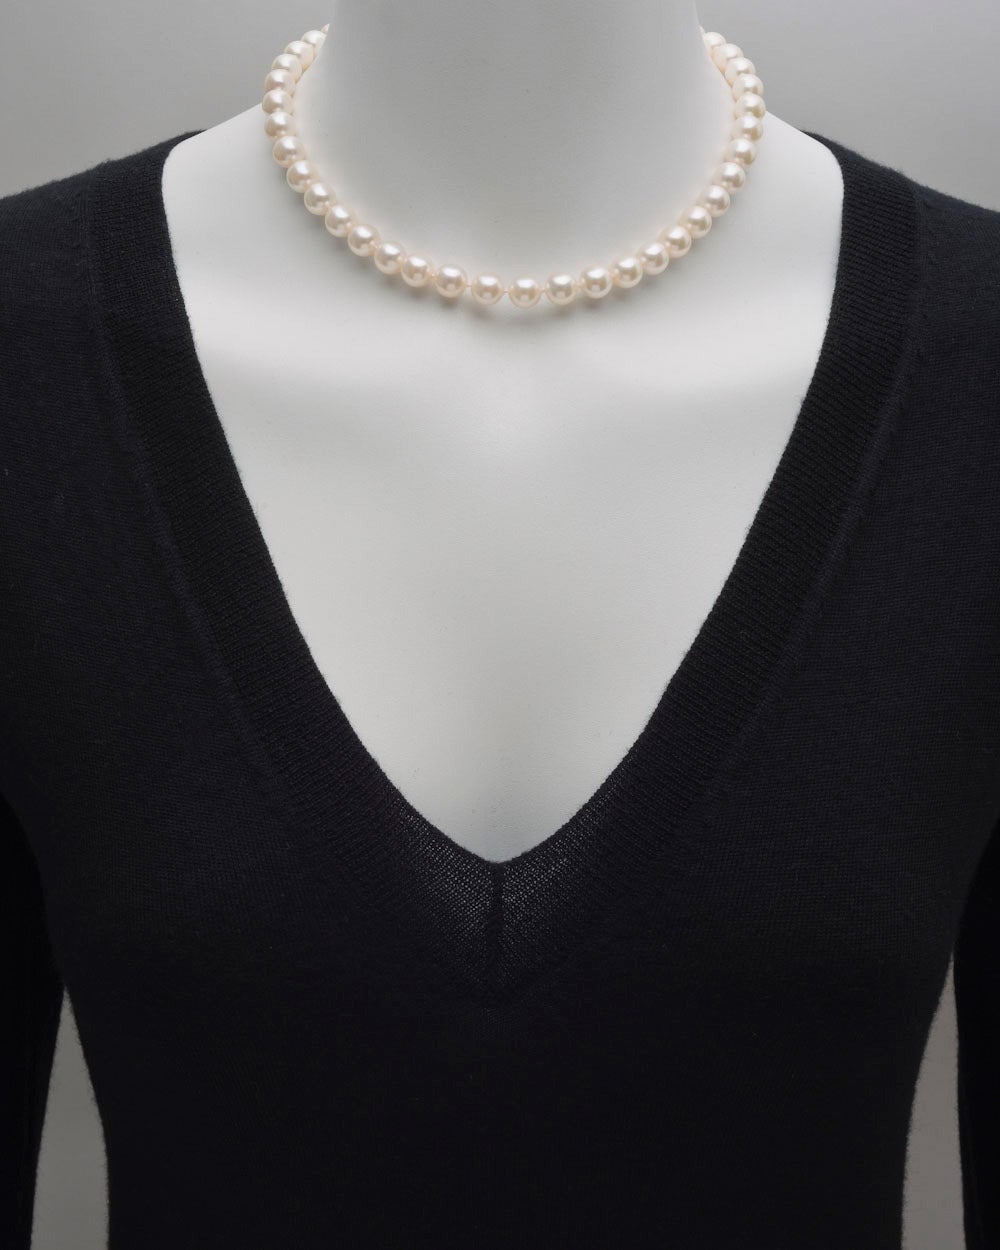 Mikimoto Cultured Akoya Pearl Necklace at 1stdibs